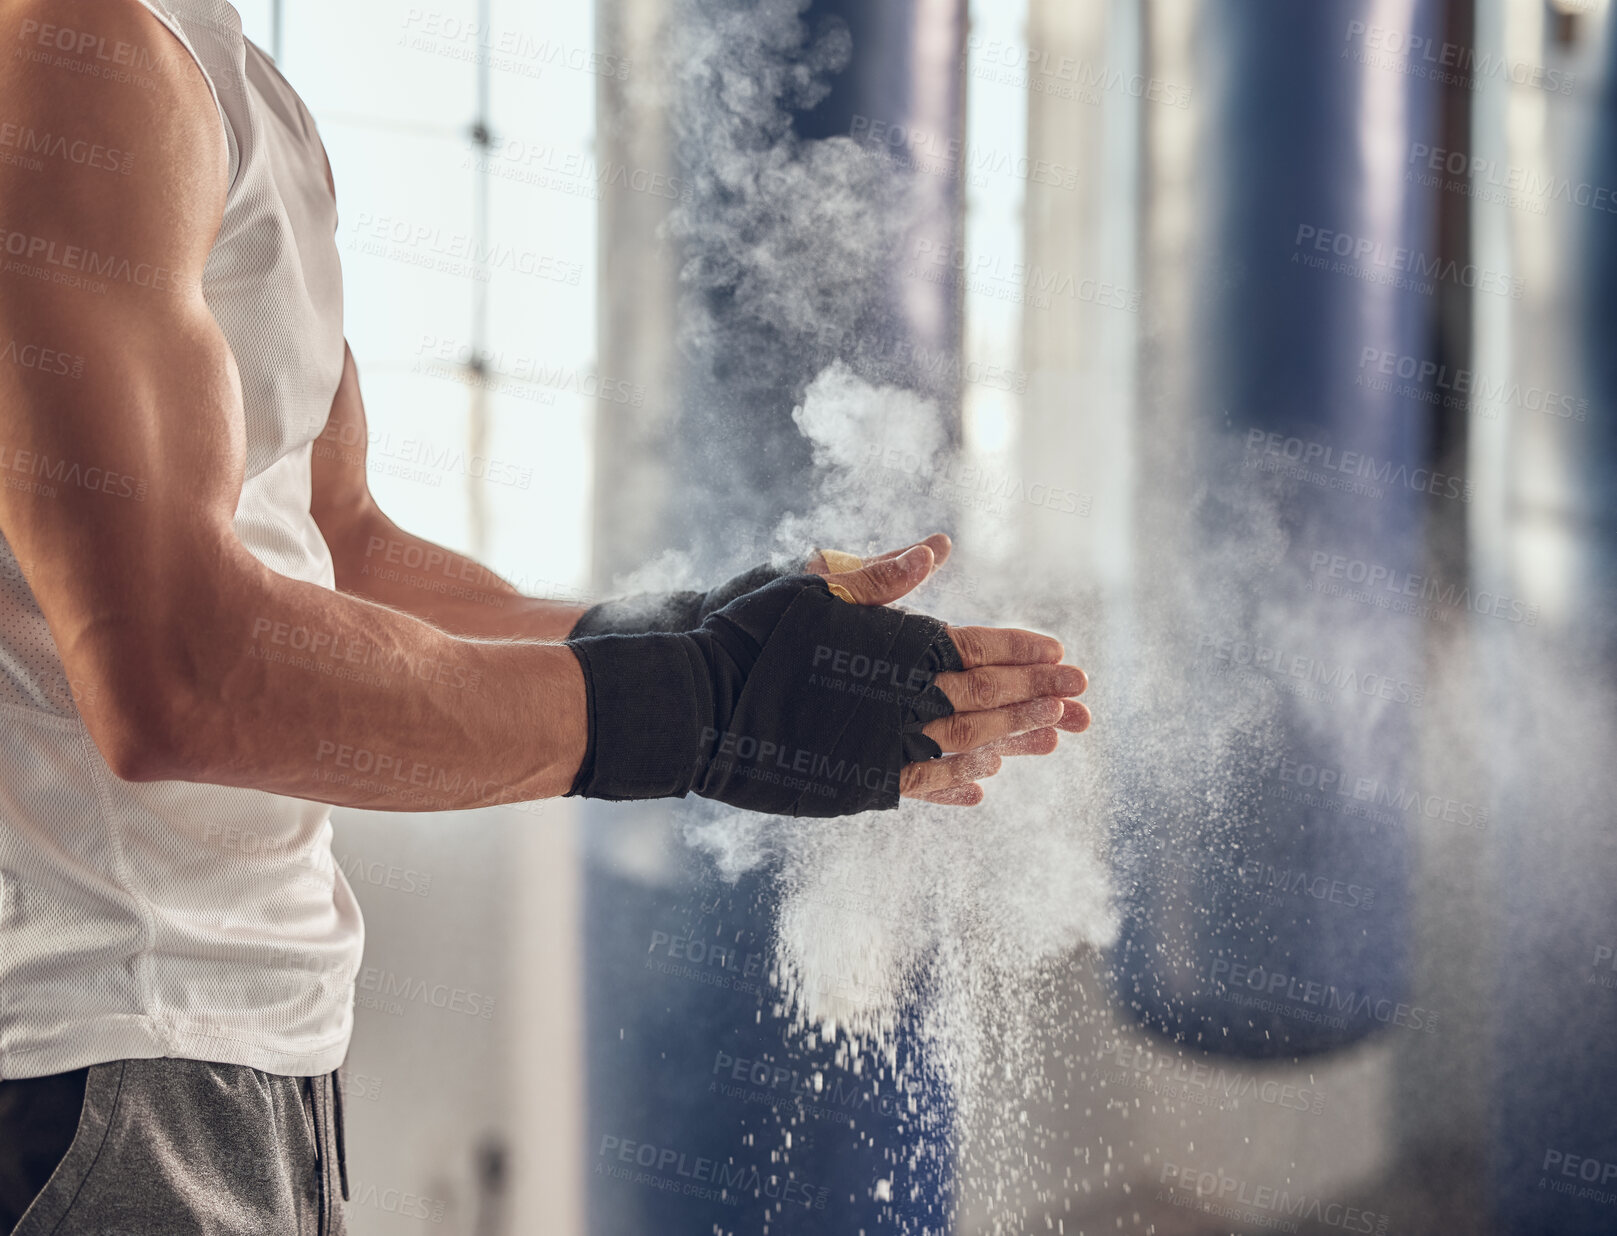 Buy stock photo Mma fighter prepare for boxing routine. Combat using chalk to prepare for training workout. Boxer getting ready with dust for combat workout. Athlete using dust on their hands cropped in the gym